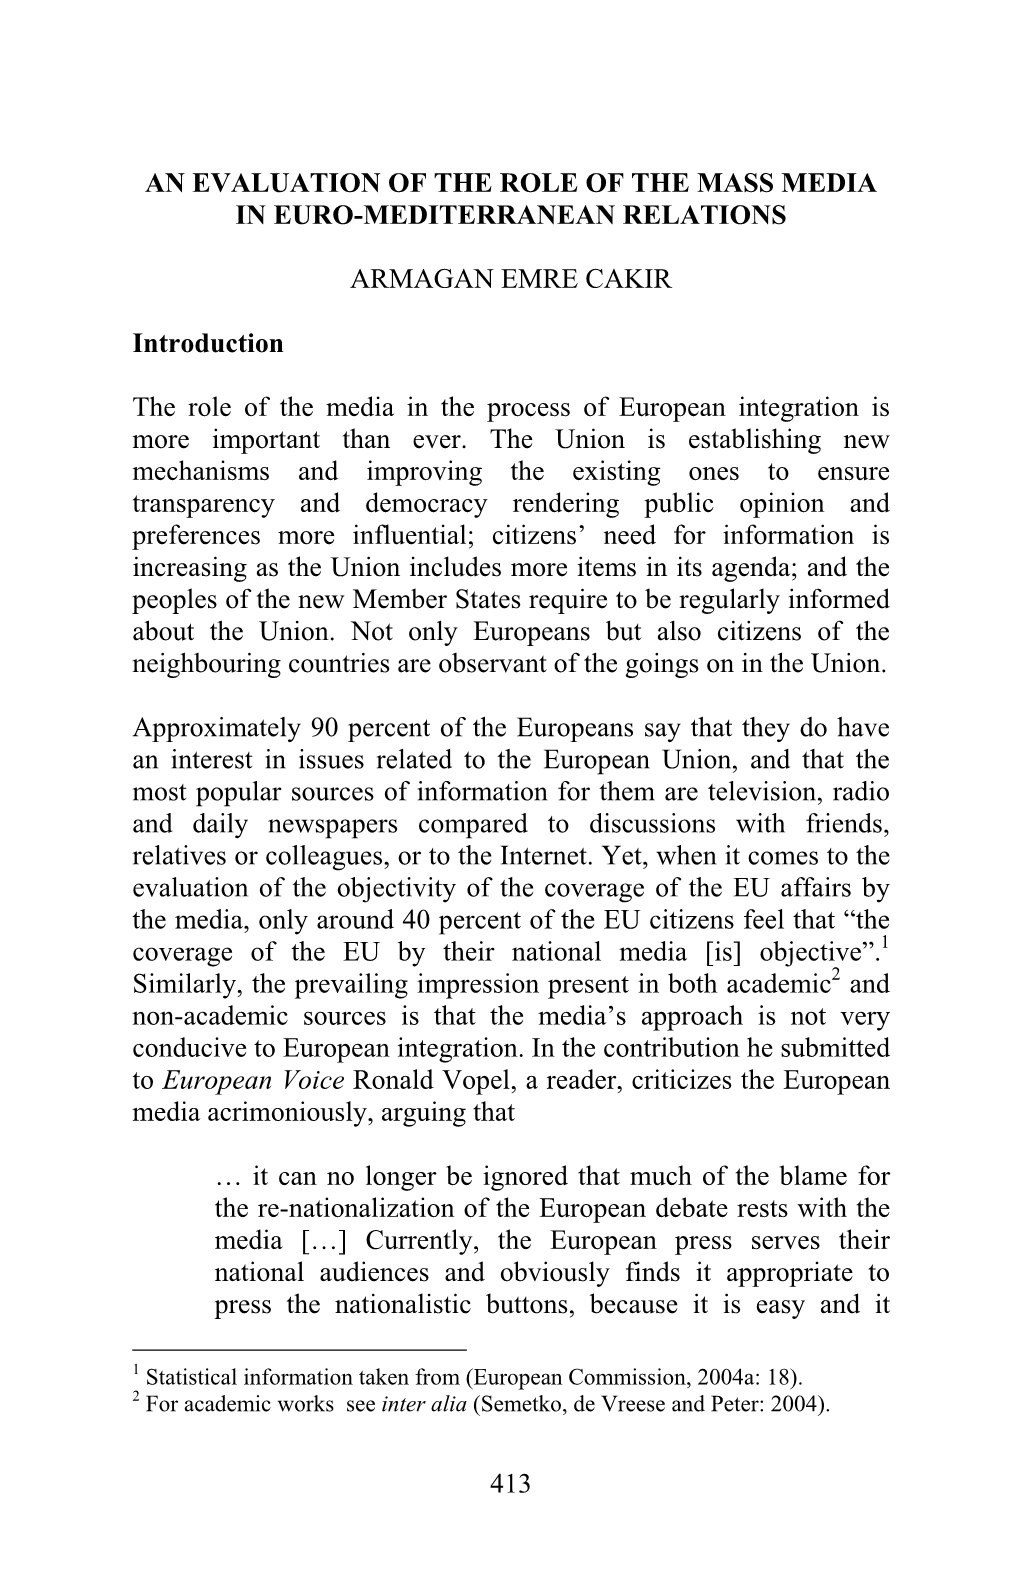 An Evaluation of the Role of the Mass Media in the Euro